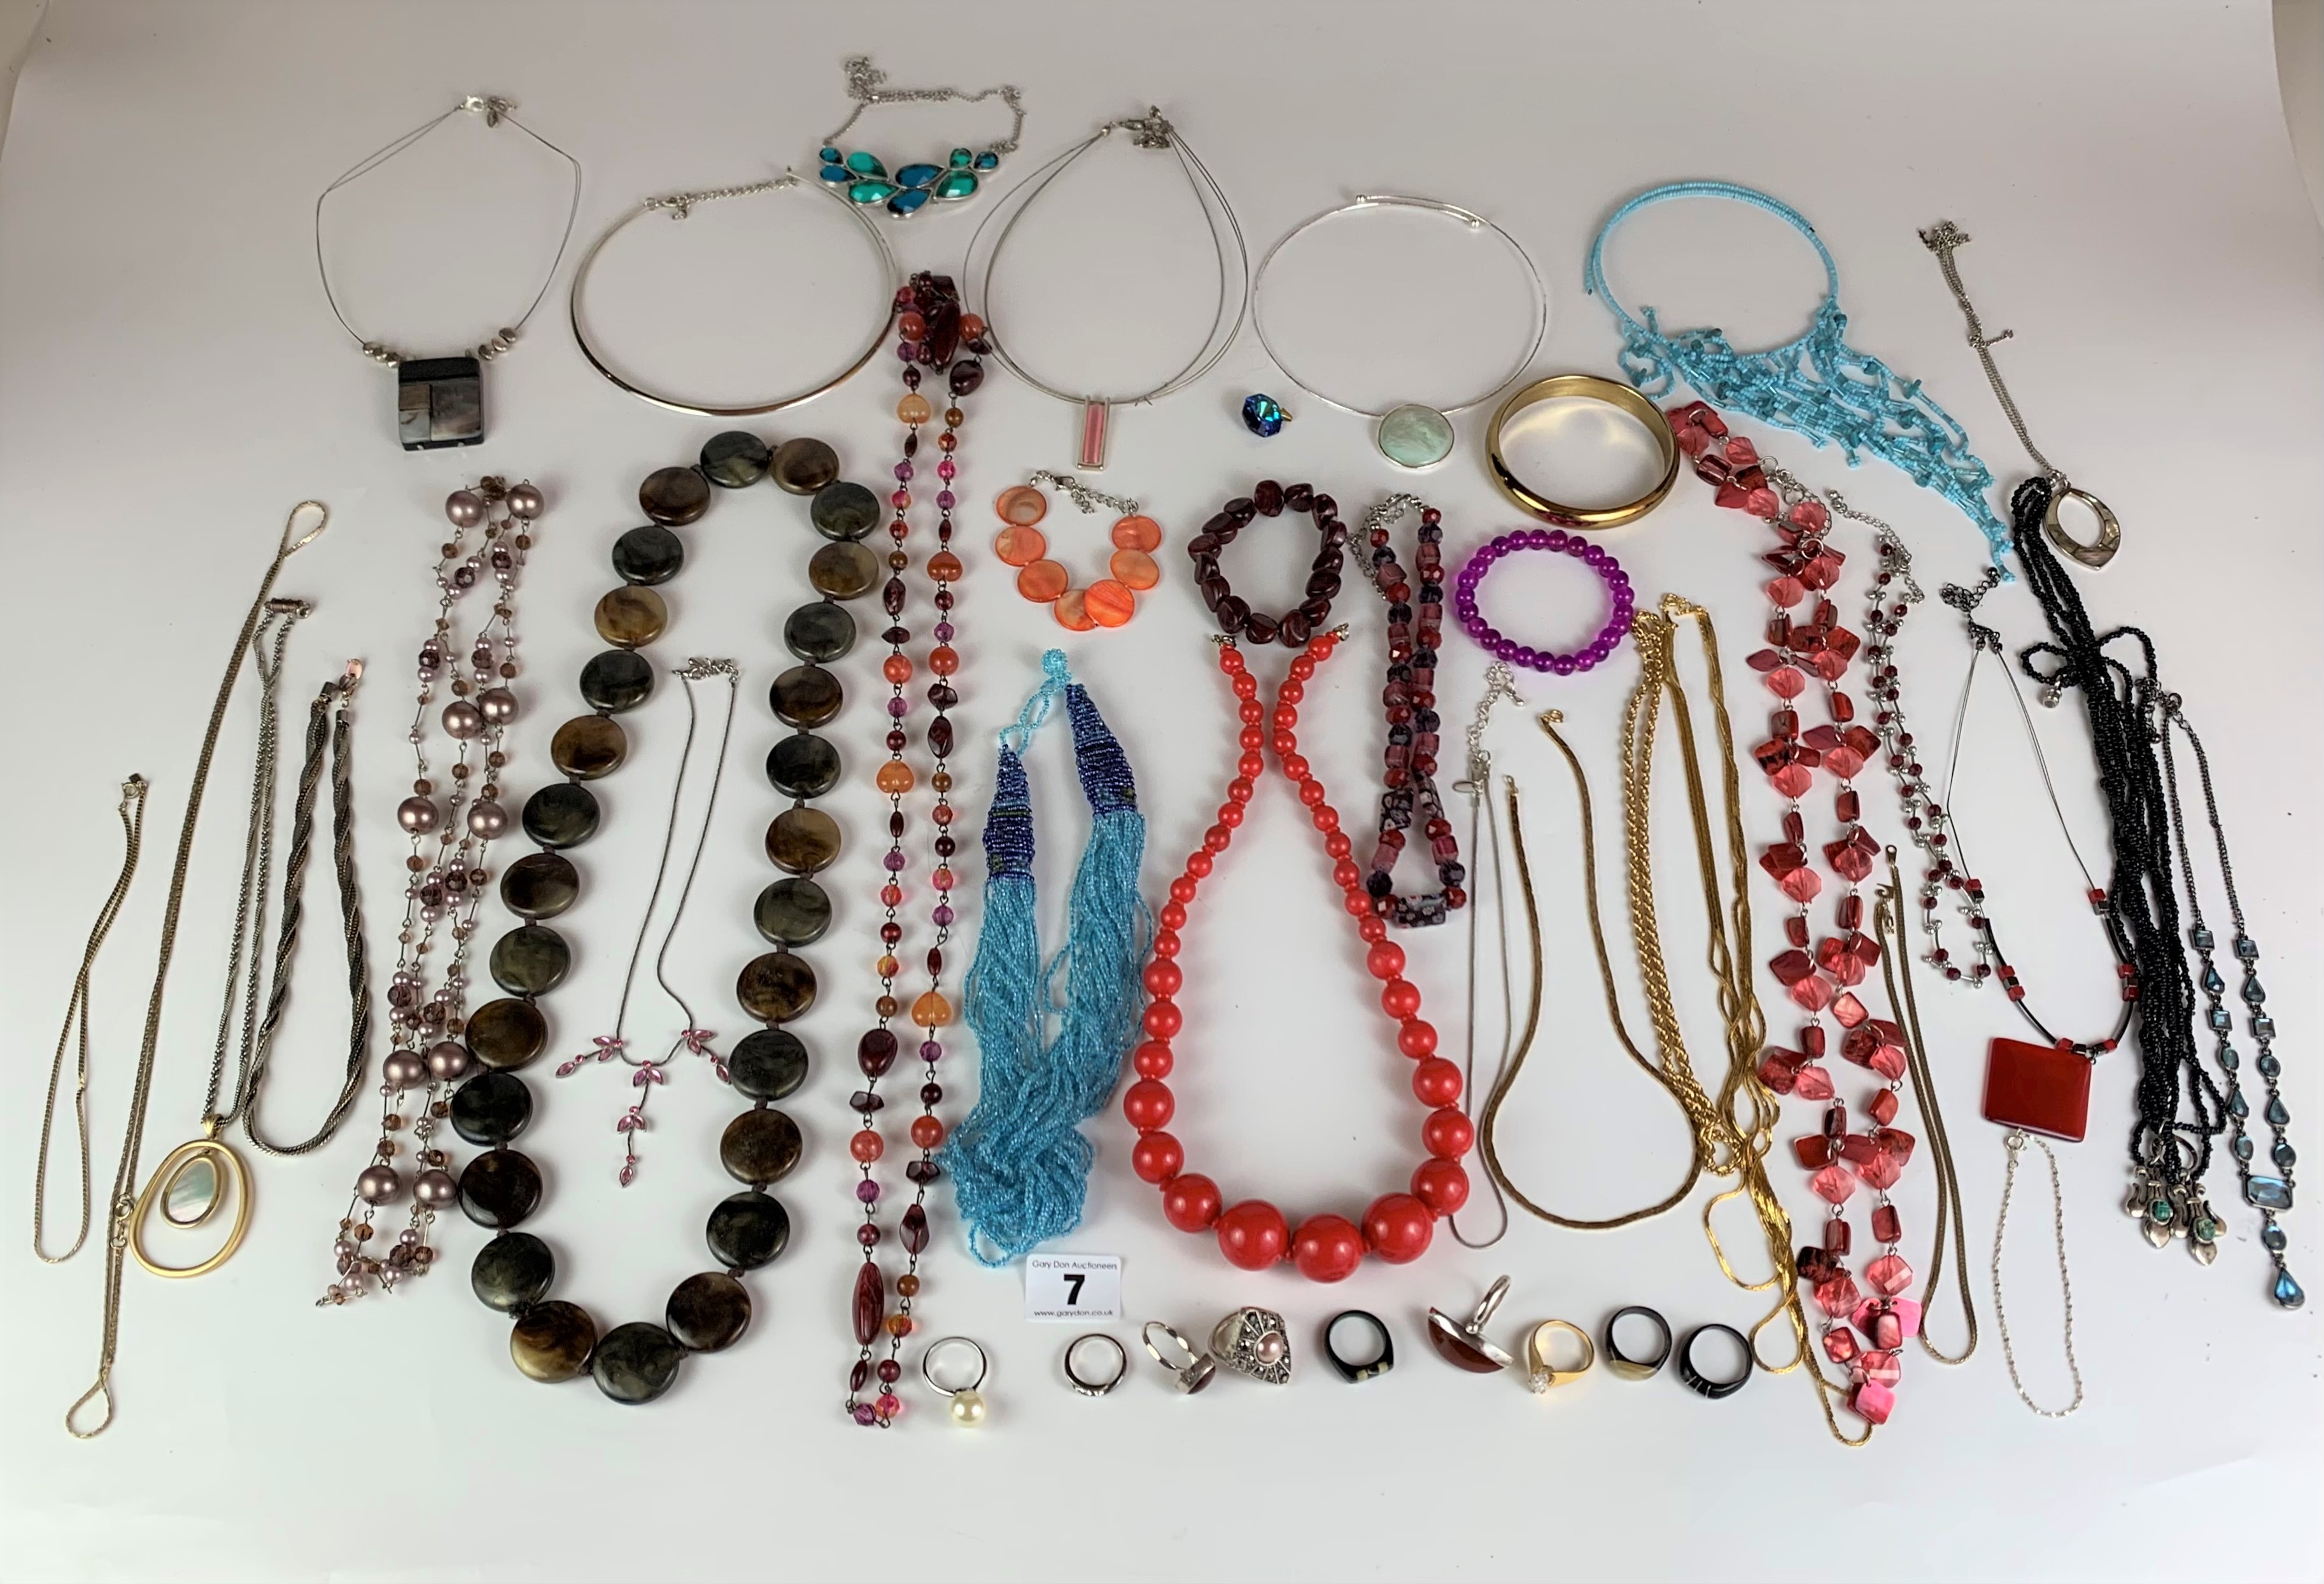 Dress jewellery including necklaces, beads, bracelets, rings etc. - Image 2 of 14